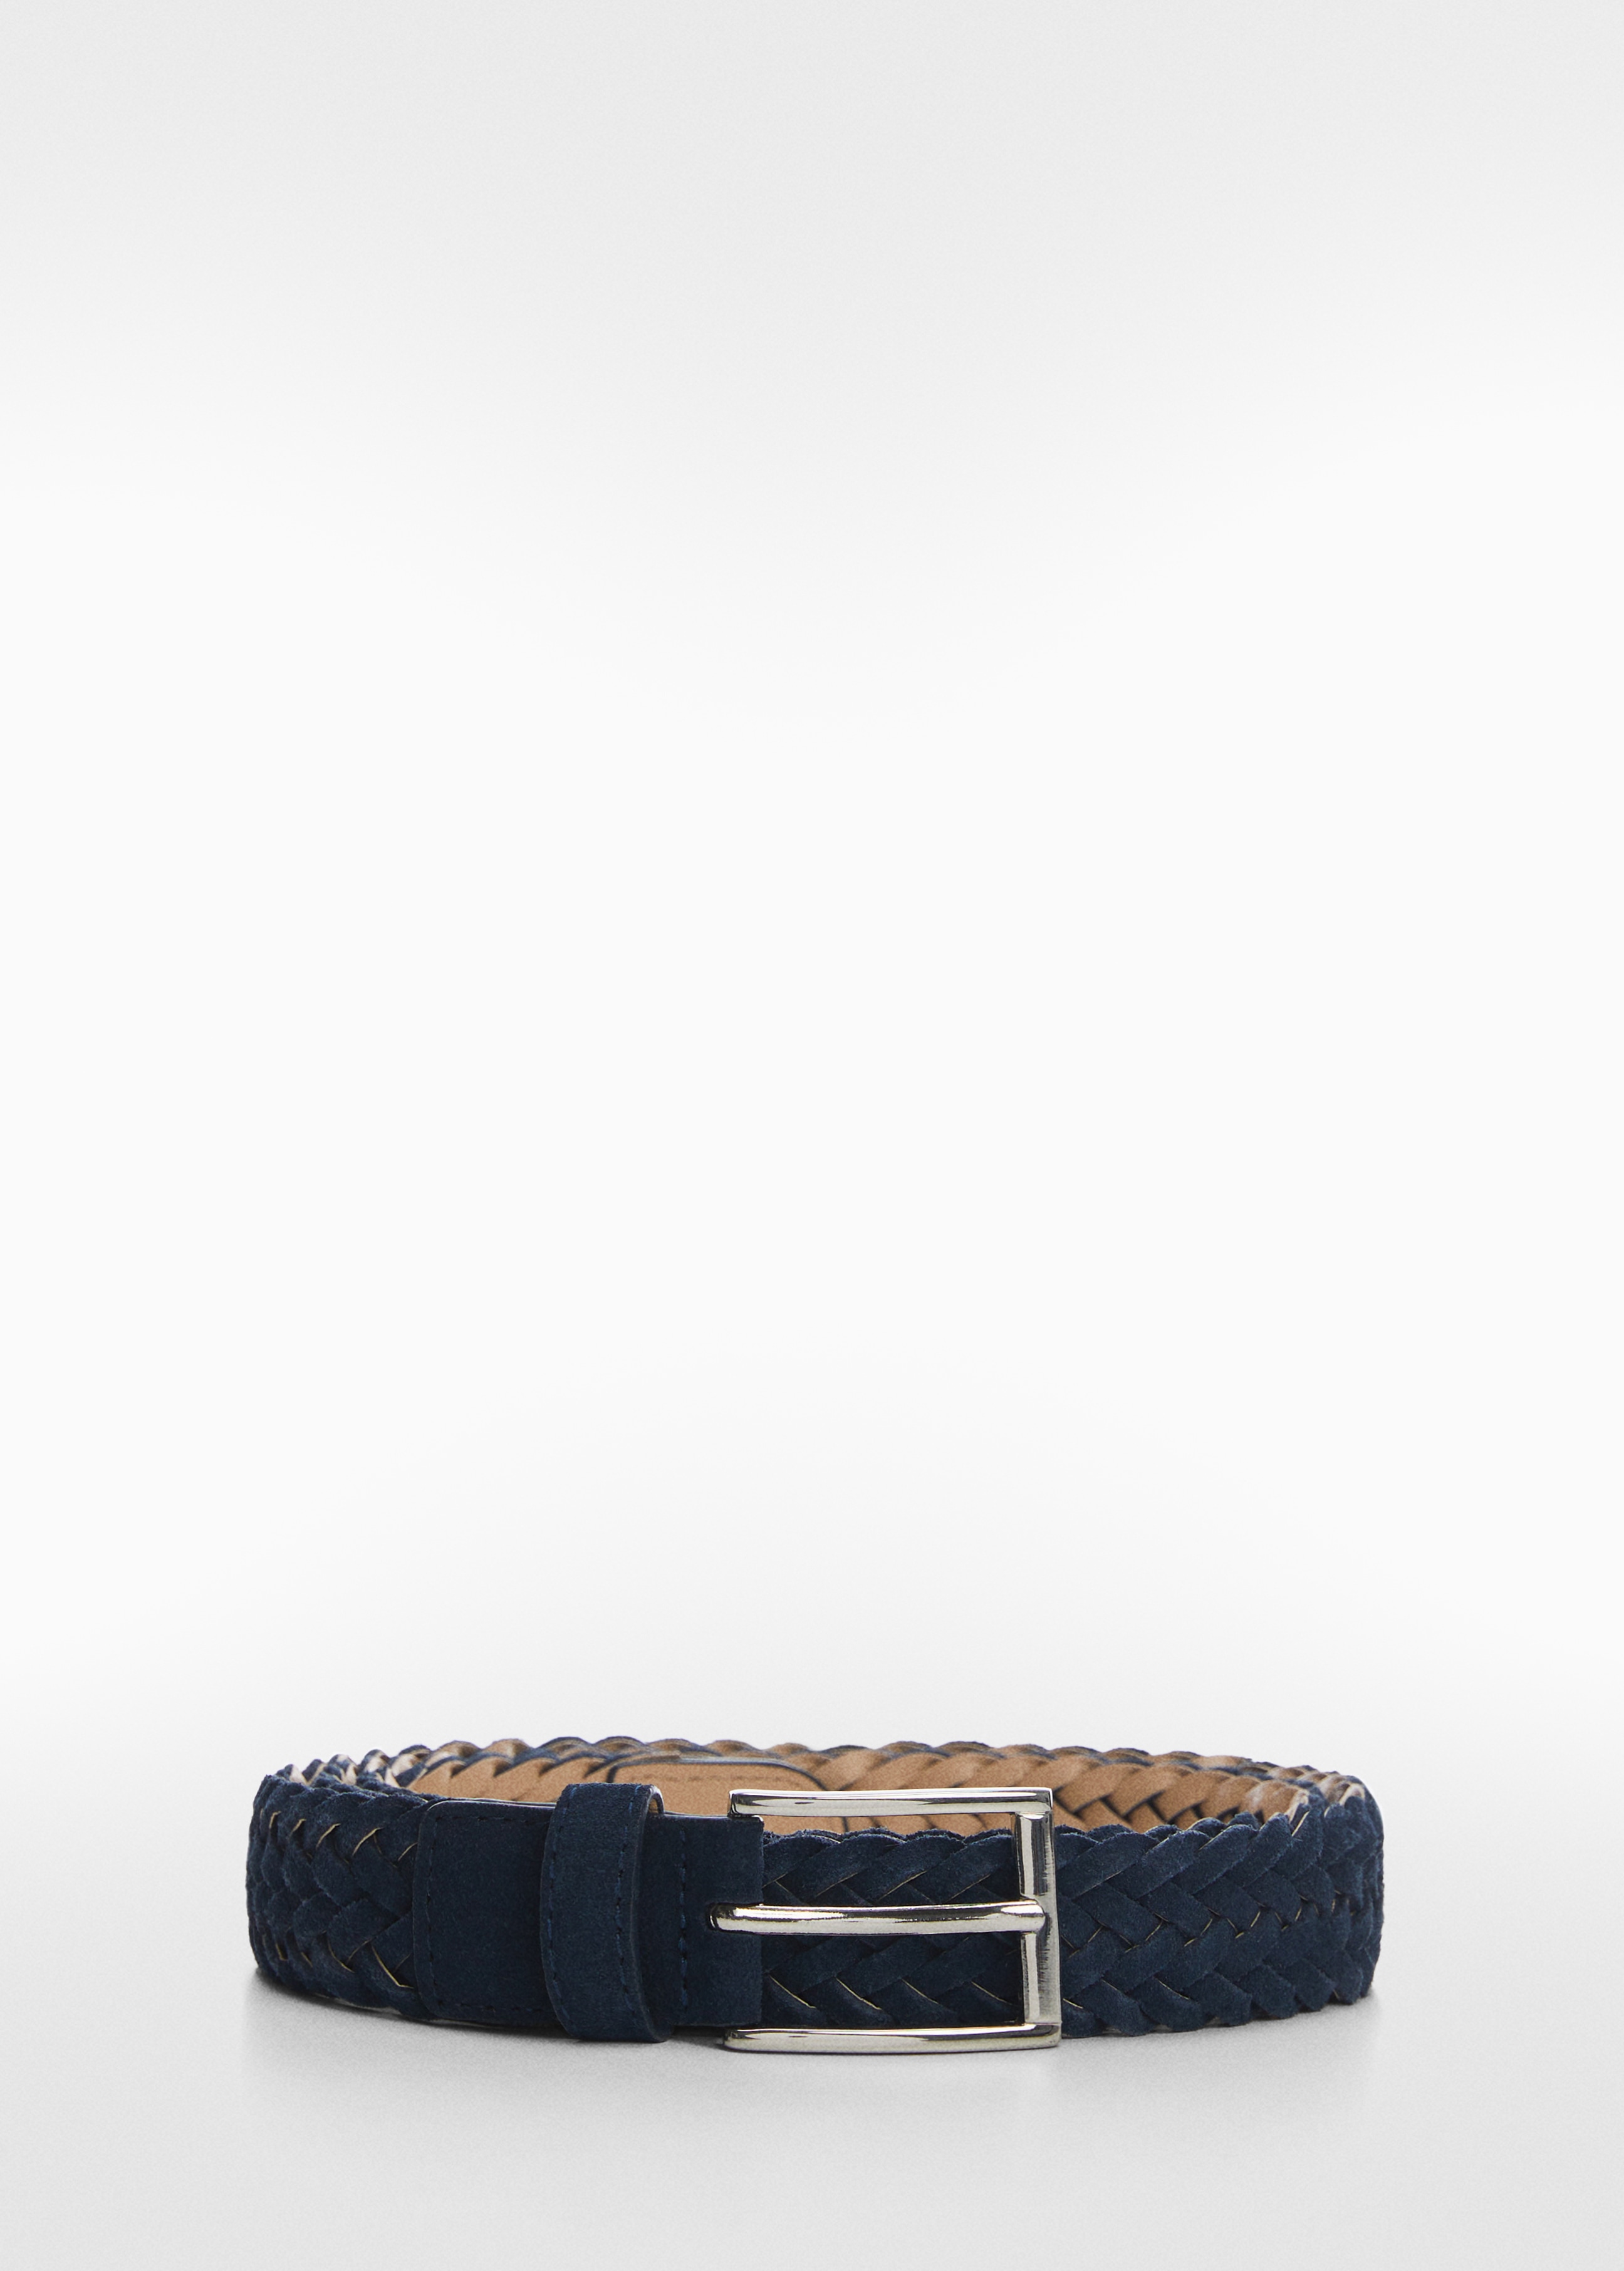 Braided suede belt - Article without model